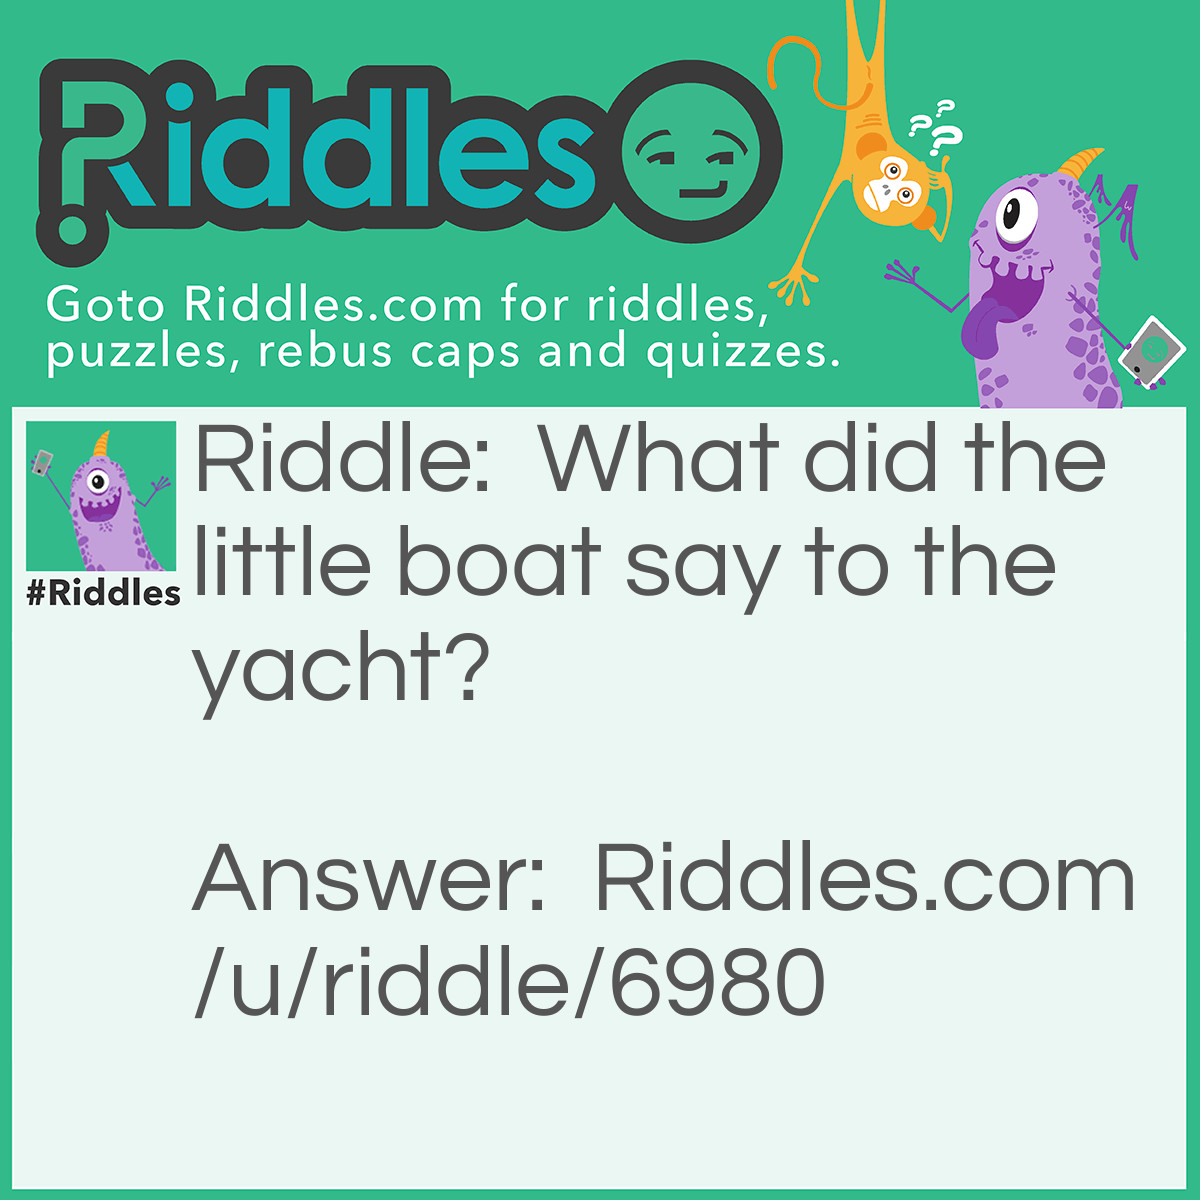 Riddle: What did the little boat say to the yacht? Answer: "Can I interest you in a little of my row-mance?"